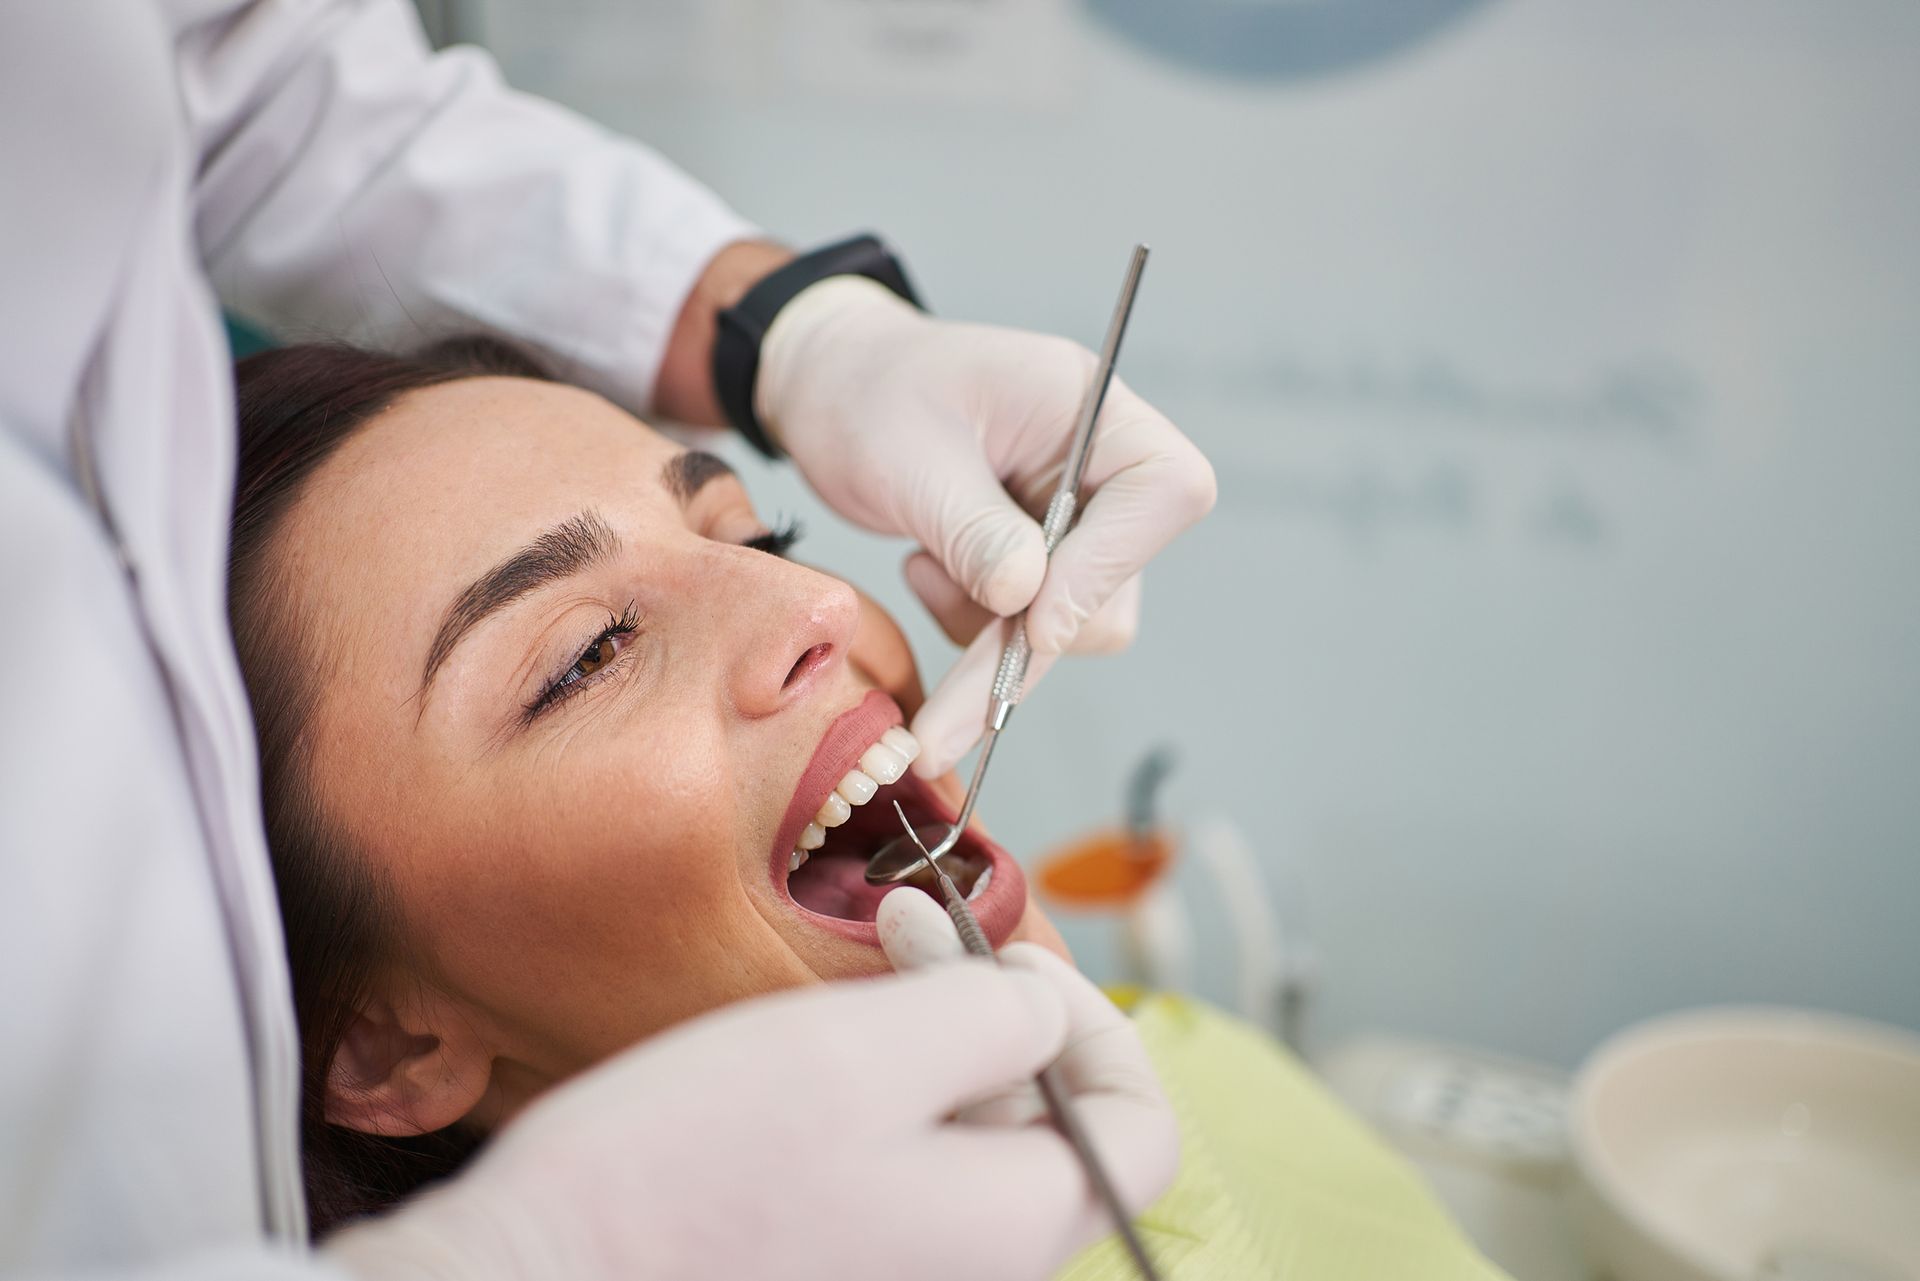 A woman is getting her teeth examined by a dentist.